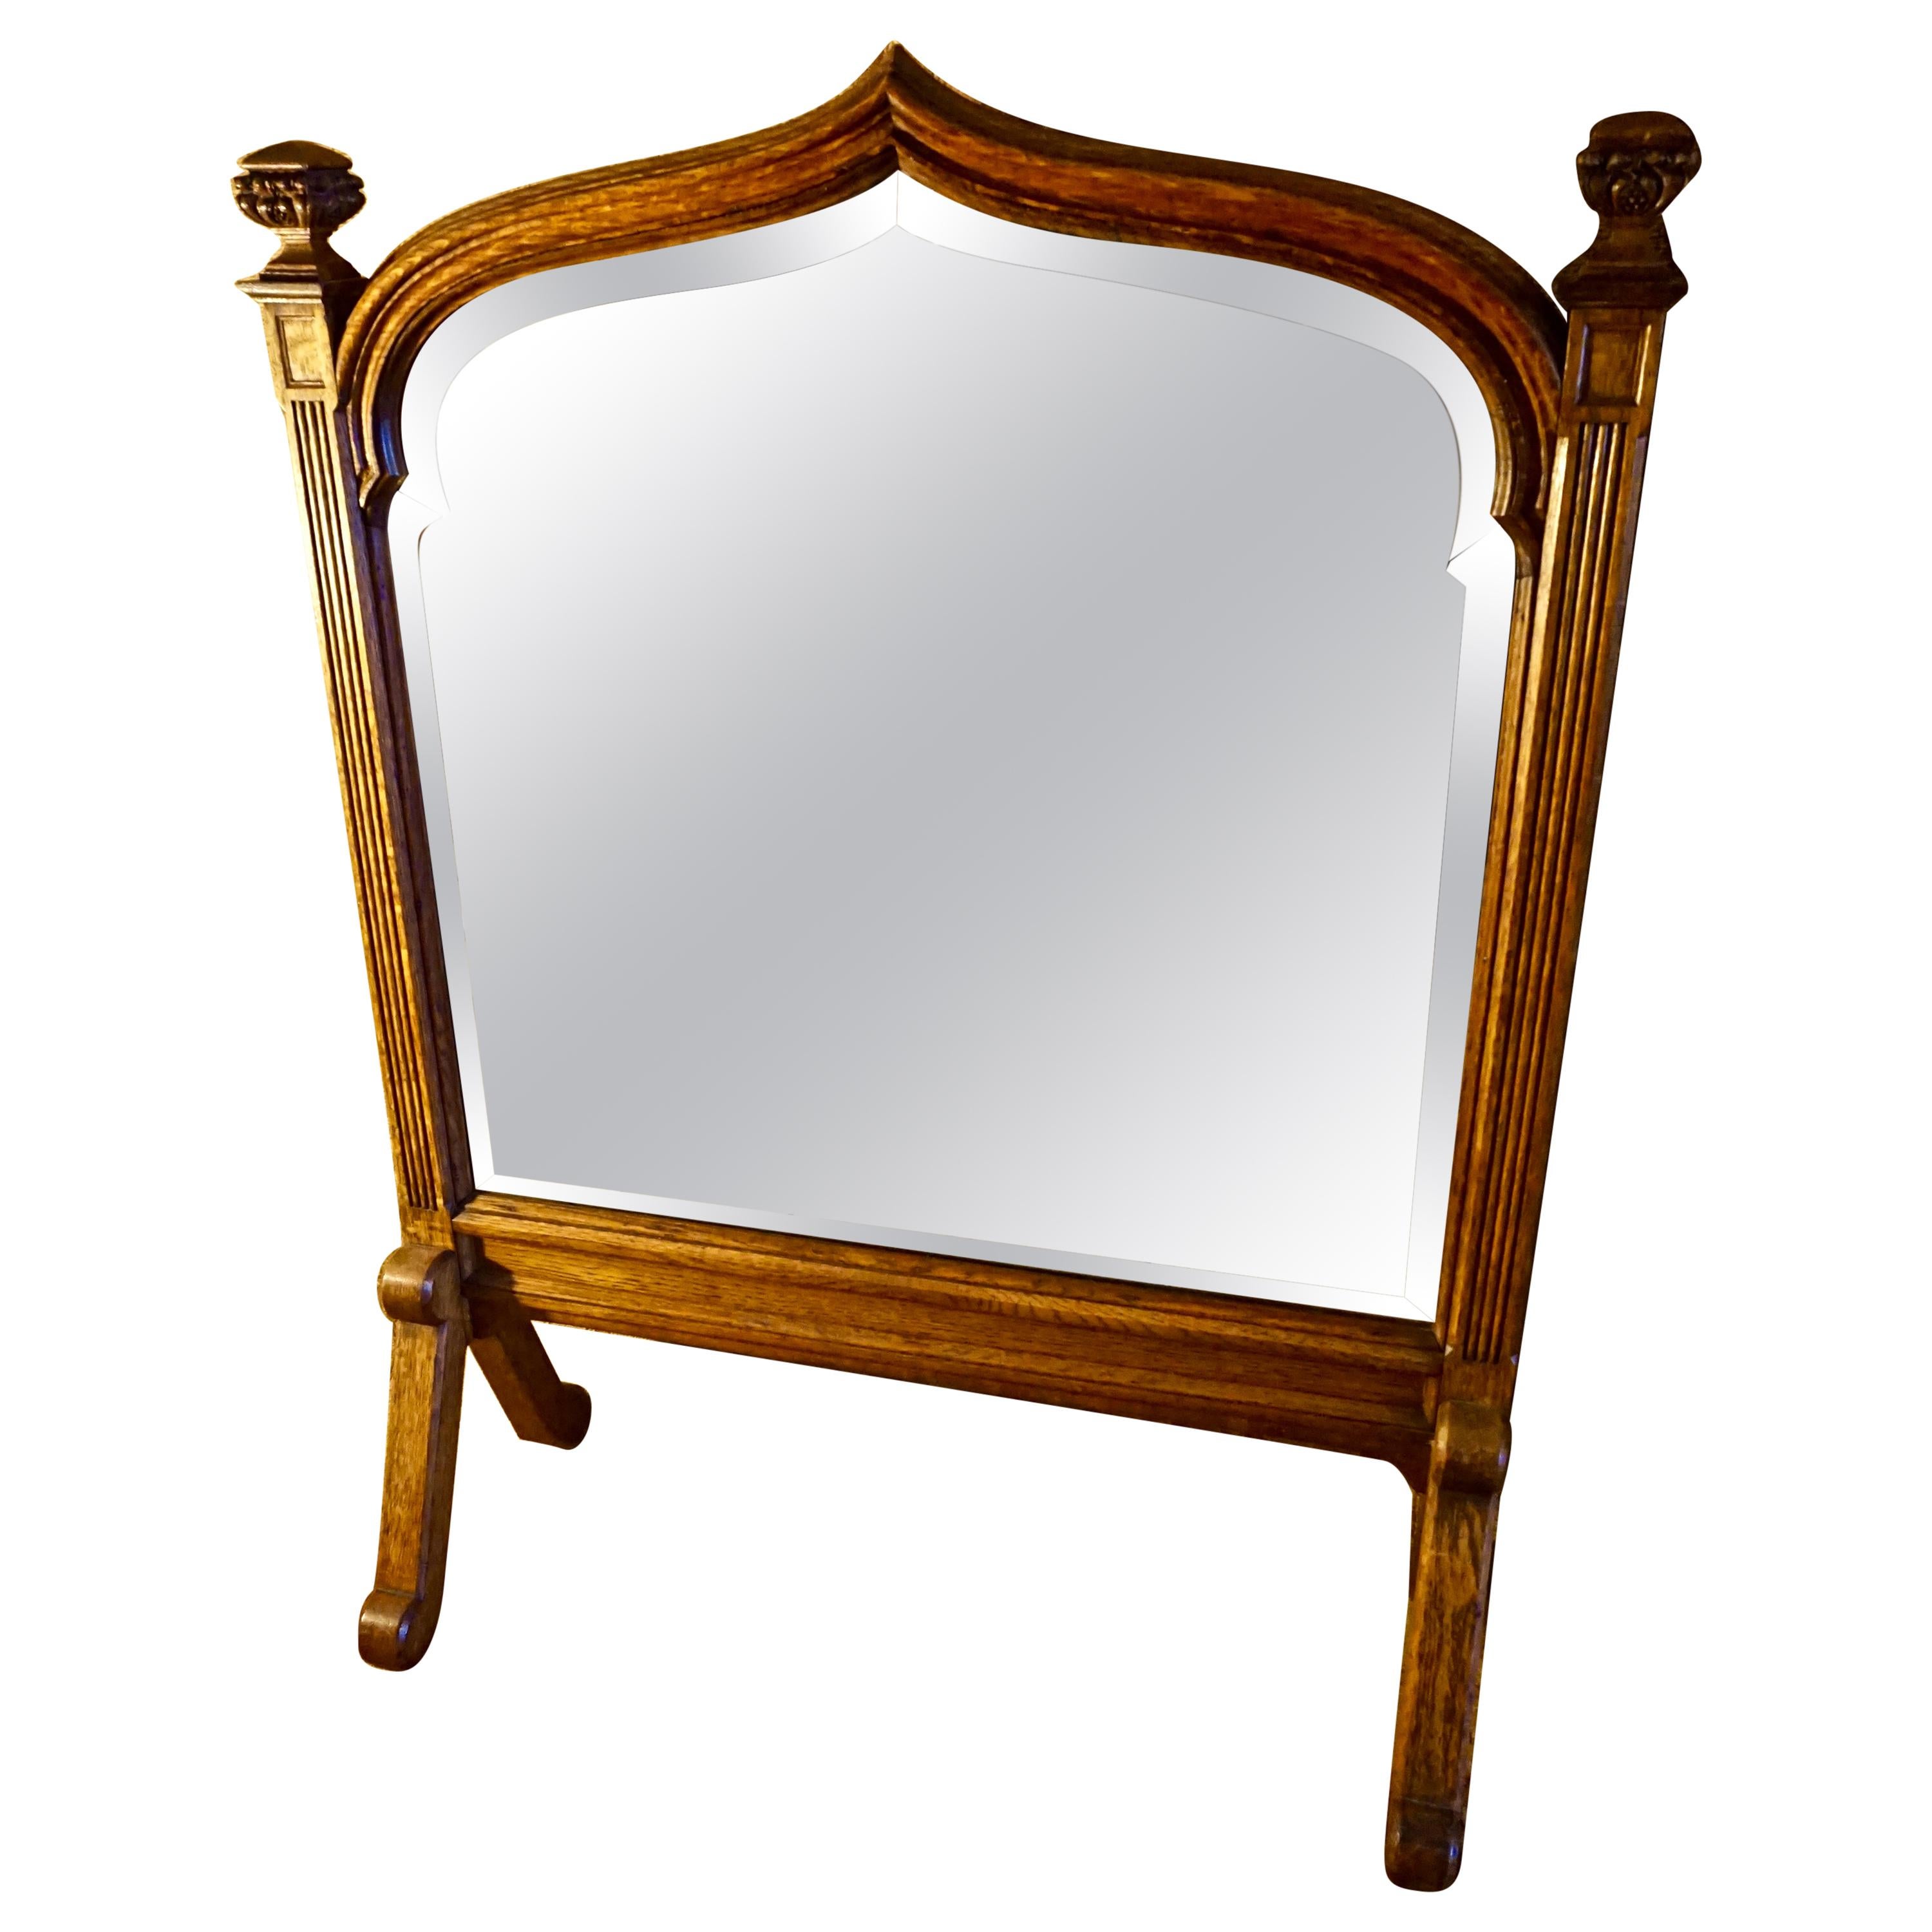 Gothic Revival English Oak Bevel Shield Shape Stand Mirror with Finials For Sale